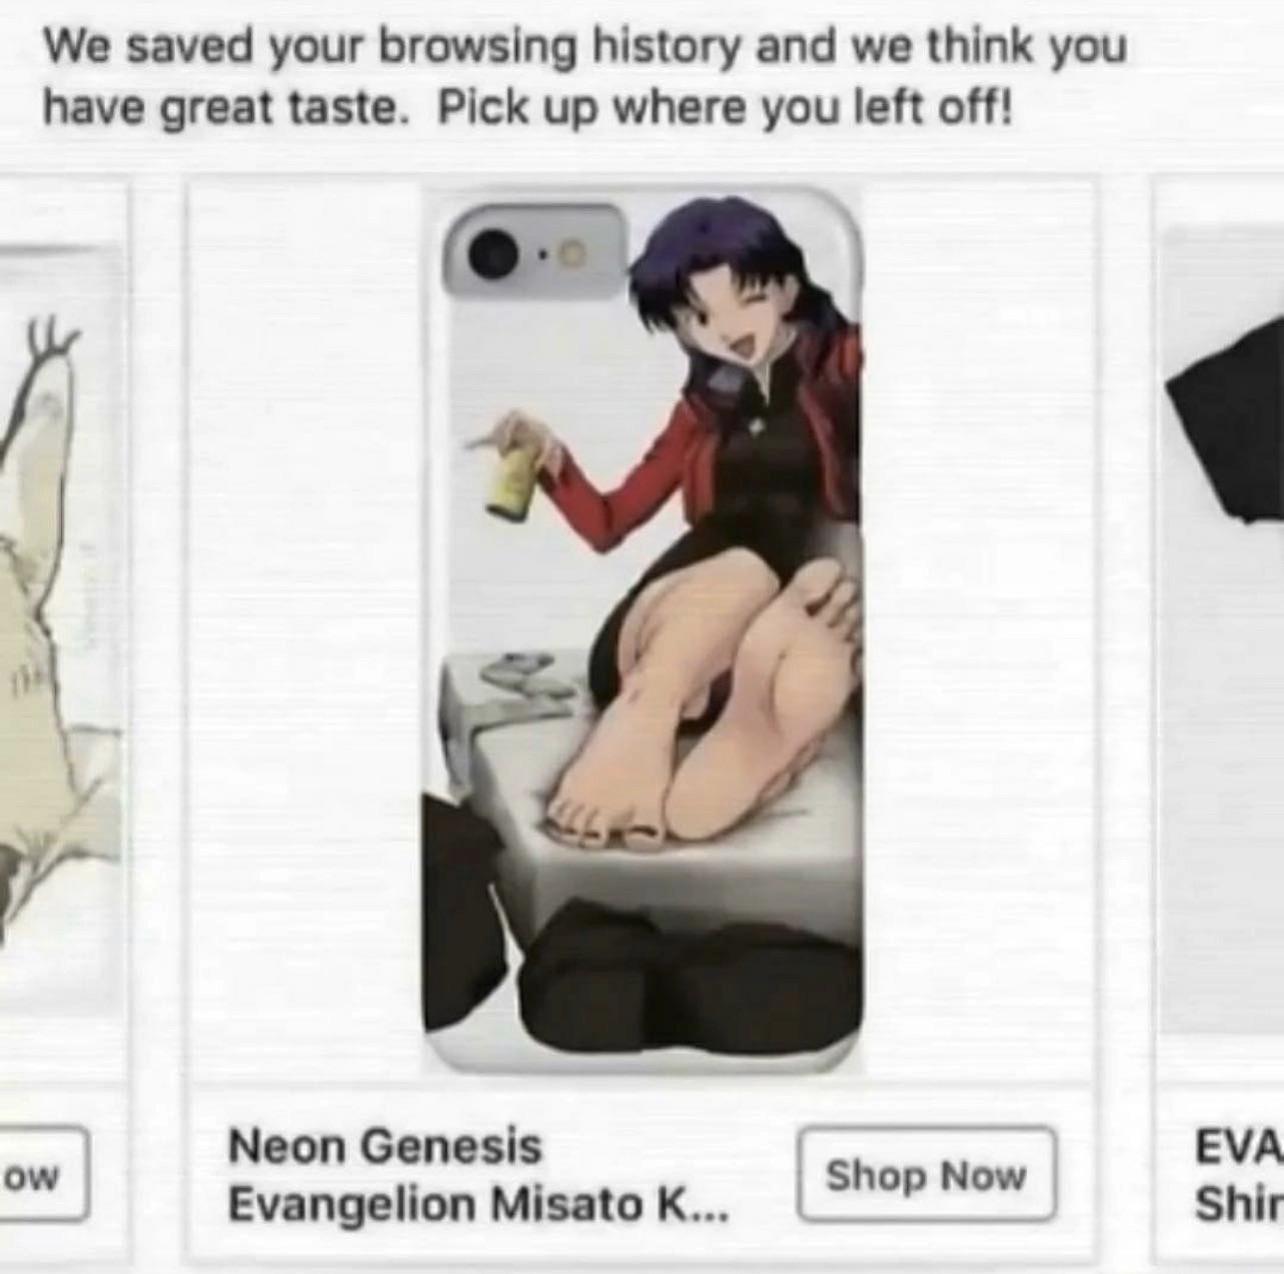 clothing - We saved your browsing history and we think you have great taste. Pick up where you left off! ow Neon Genesis Evangelion Misato K... Shop Now Eva Shir